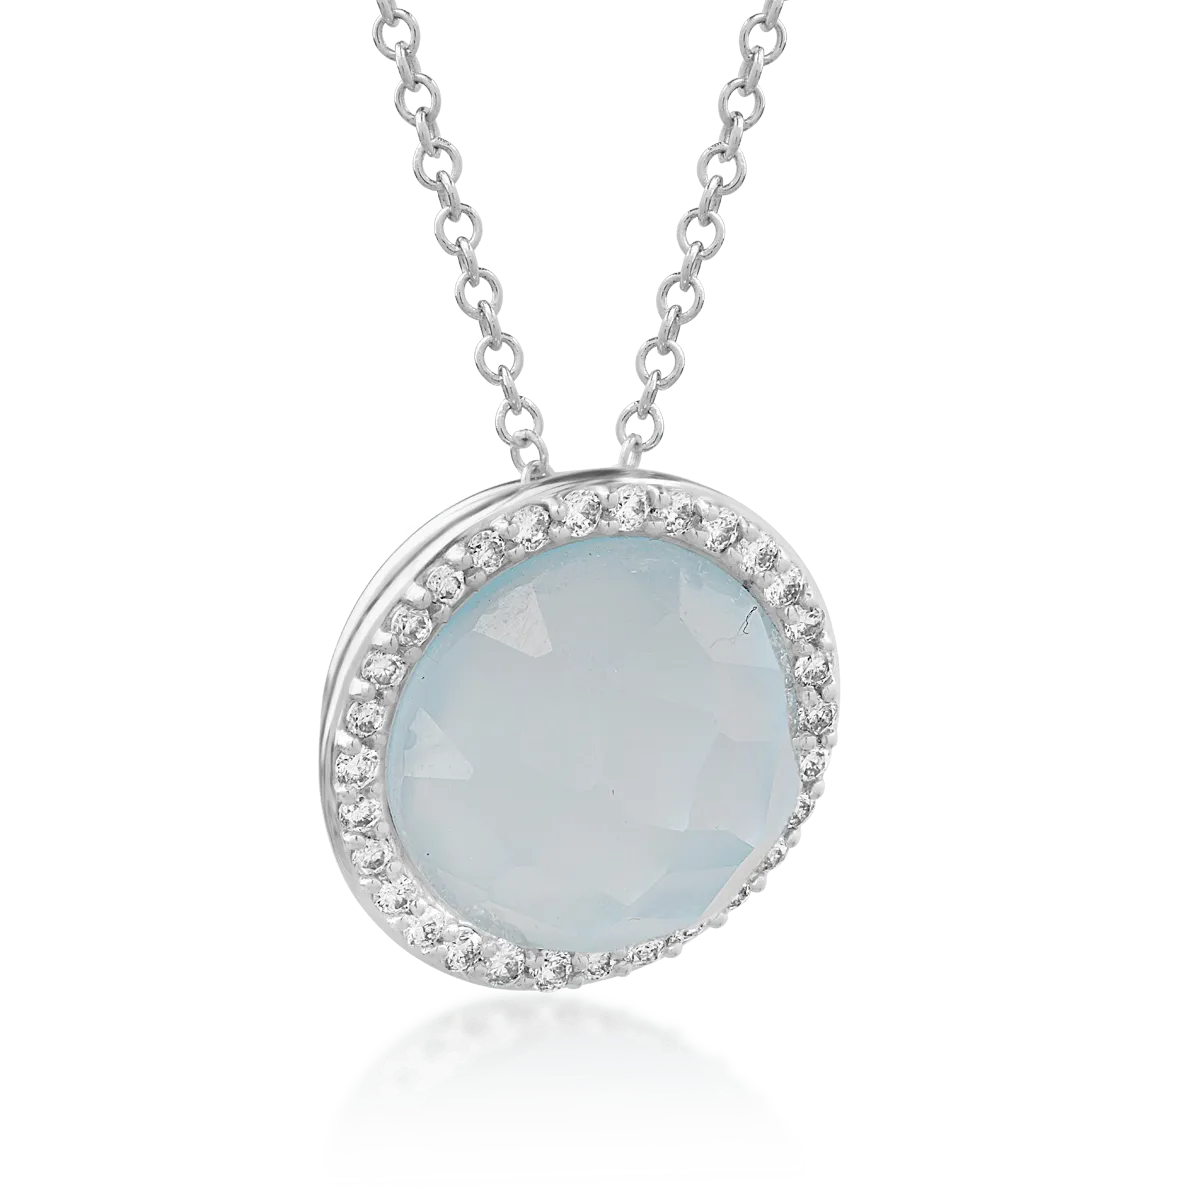 18K white gold pendant chain with 3.487ct light blue topaz and 0.11ct diamonds